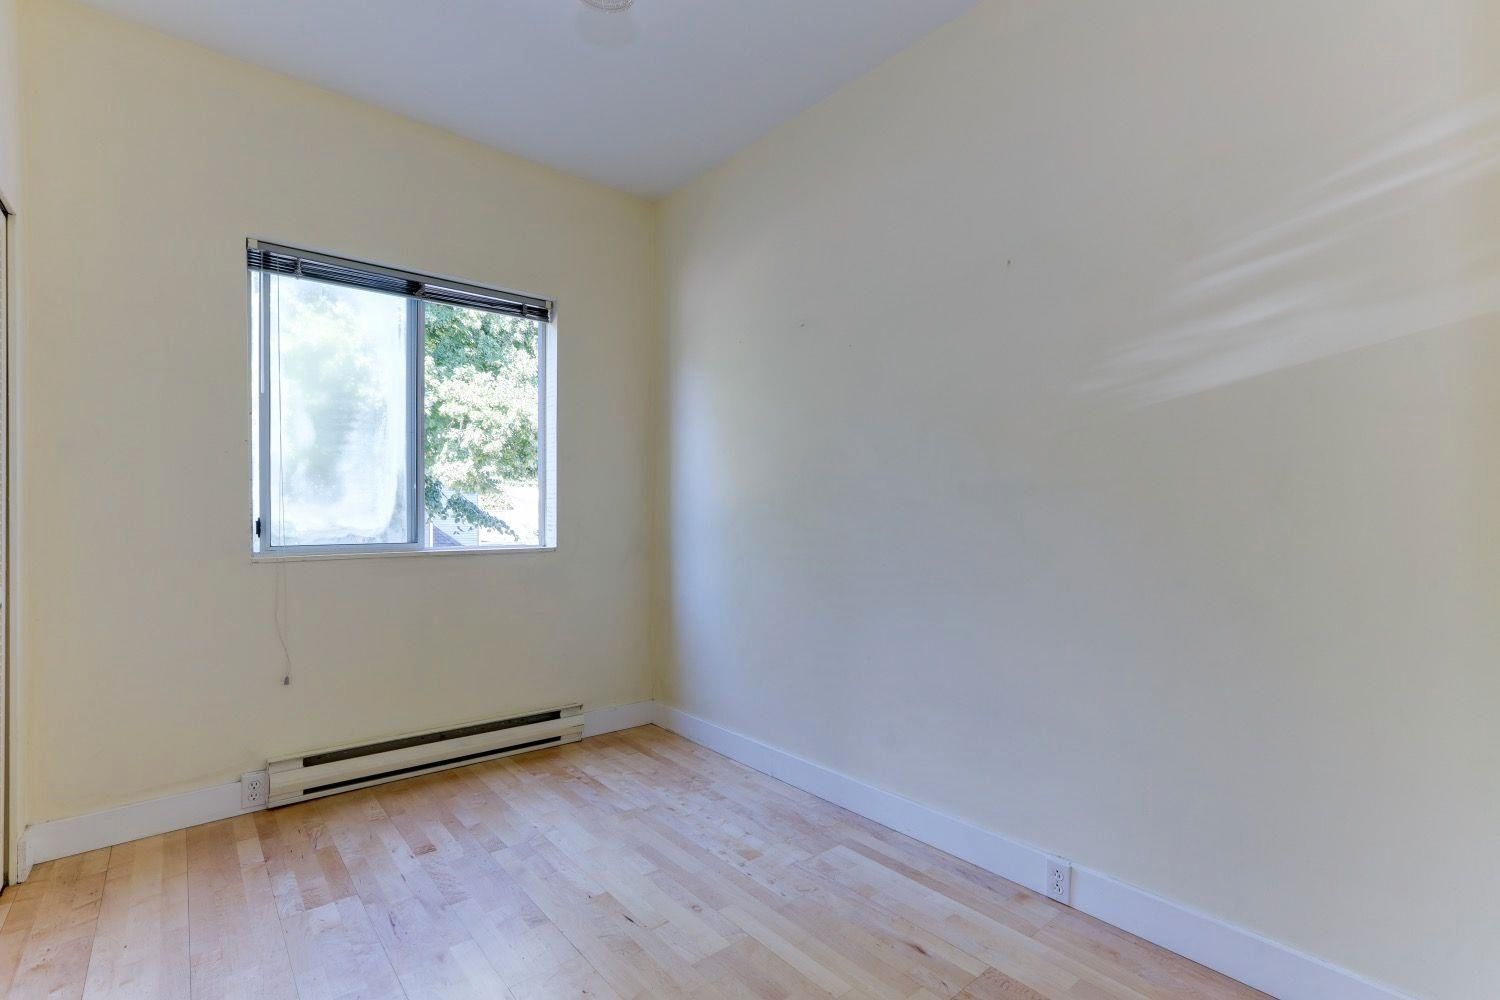 Photo 26: Photos: 6106 CHESTER STREET in Vancouver: Fraser VE Multifamily for sale (Vancouver East)  : MLS®# R2613965